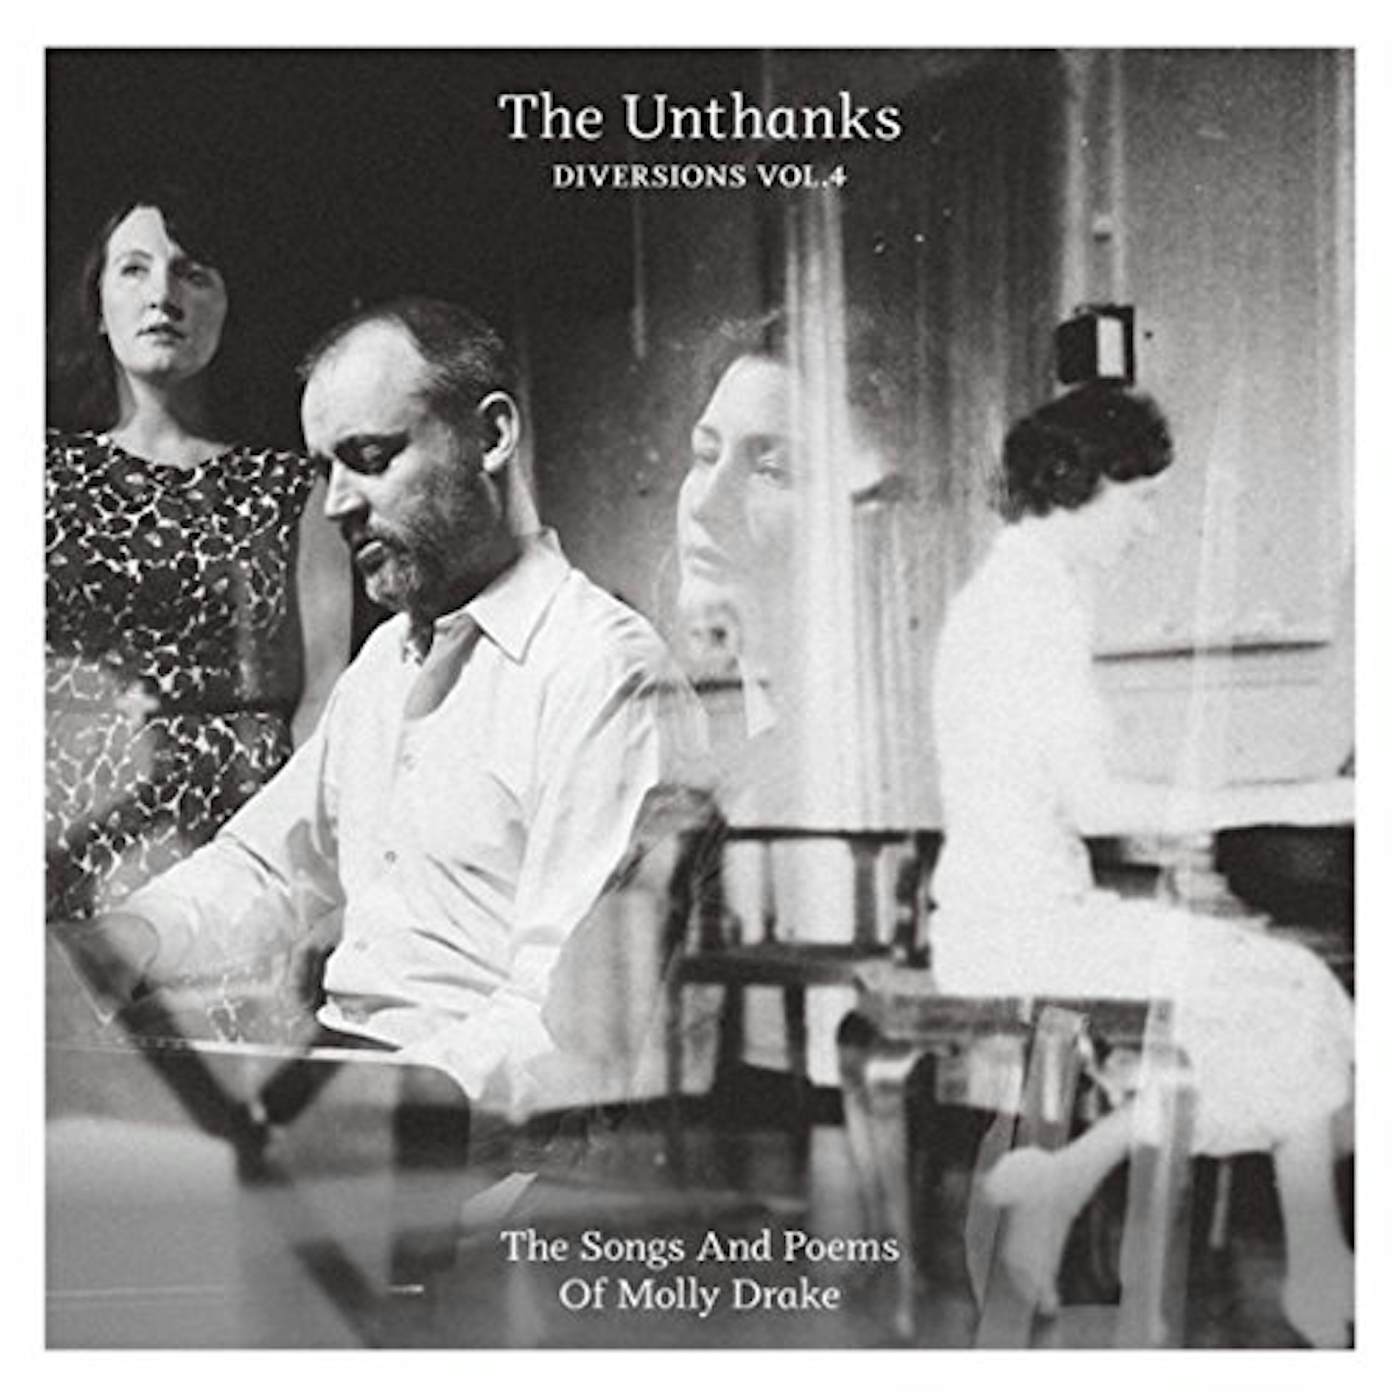 The Unthanks DIVERSIONS 4: SONGS AND POEMS OF MOLLY DRAKE Vinyl Record